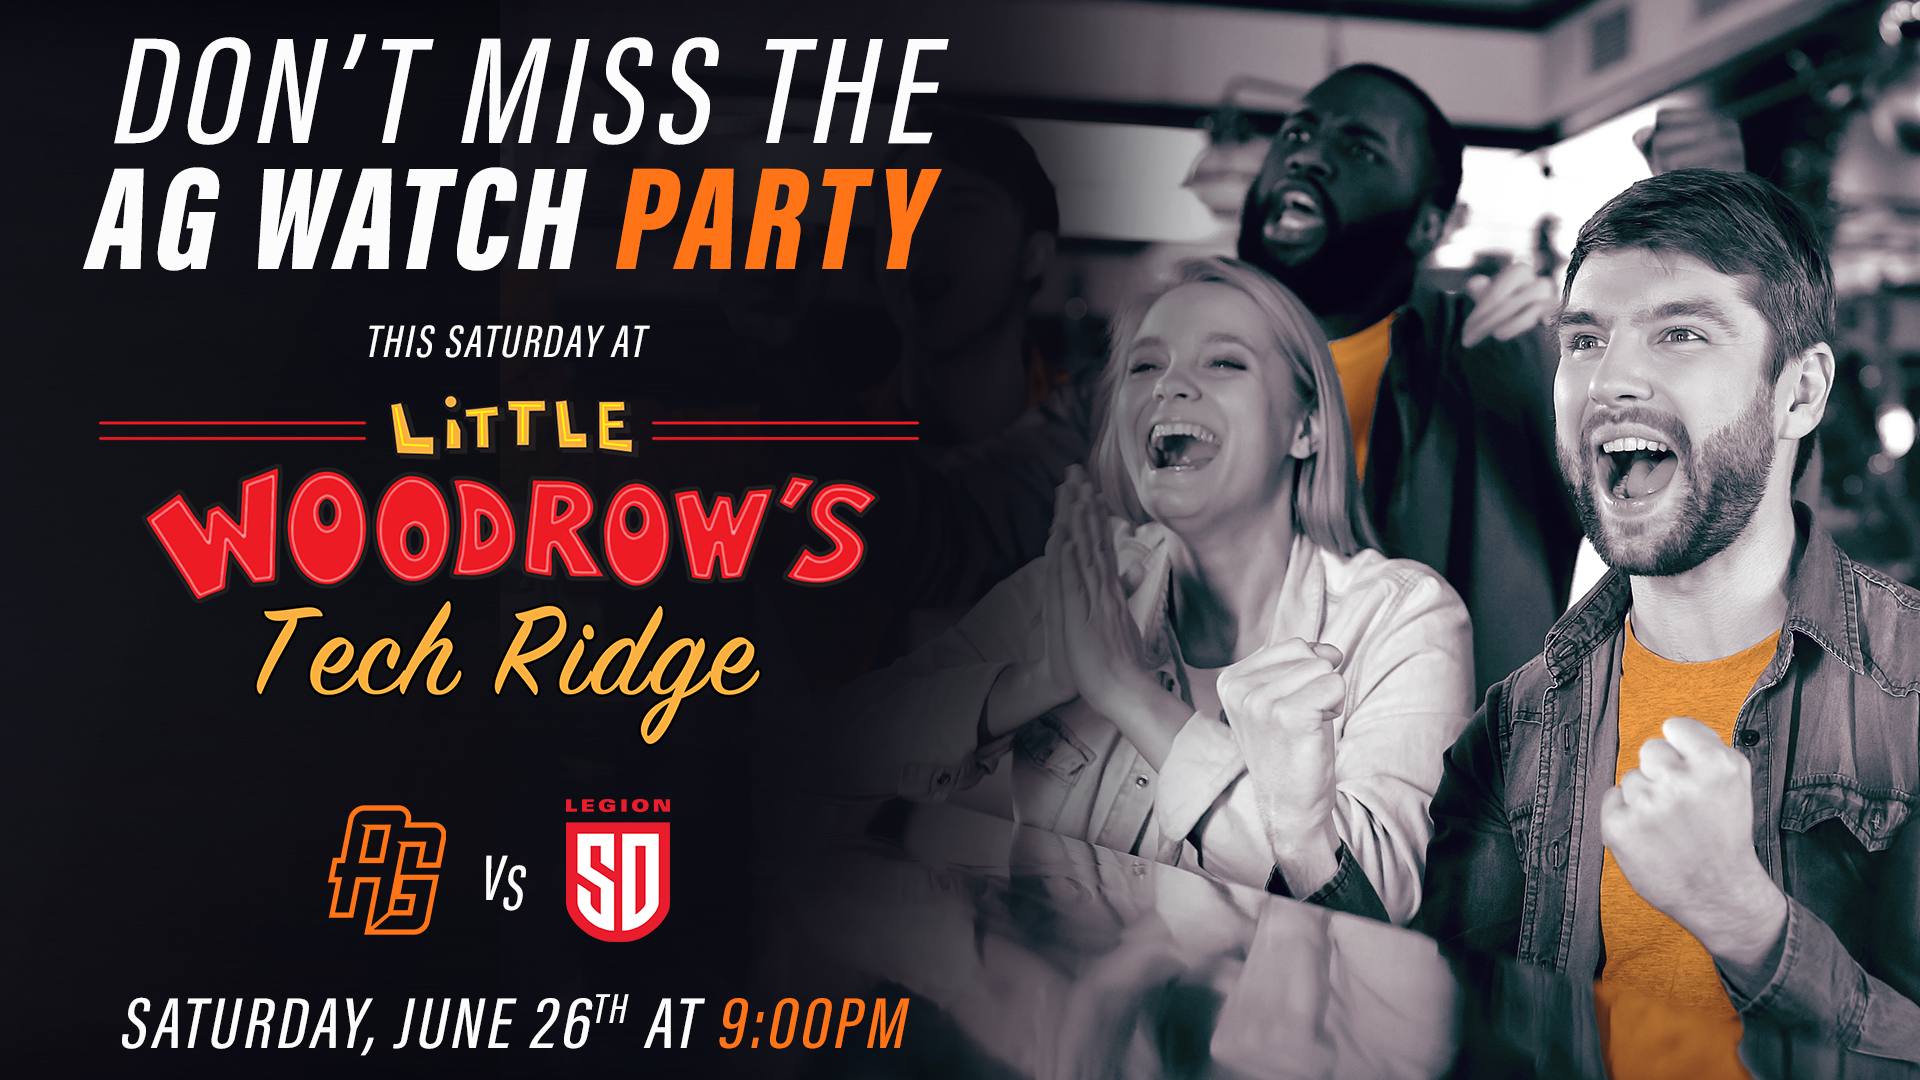 AG Watch Party This Saturday at Little Woodrow’s Tech Ridge